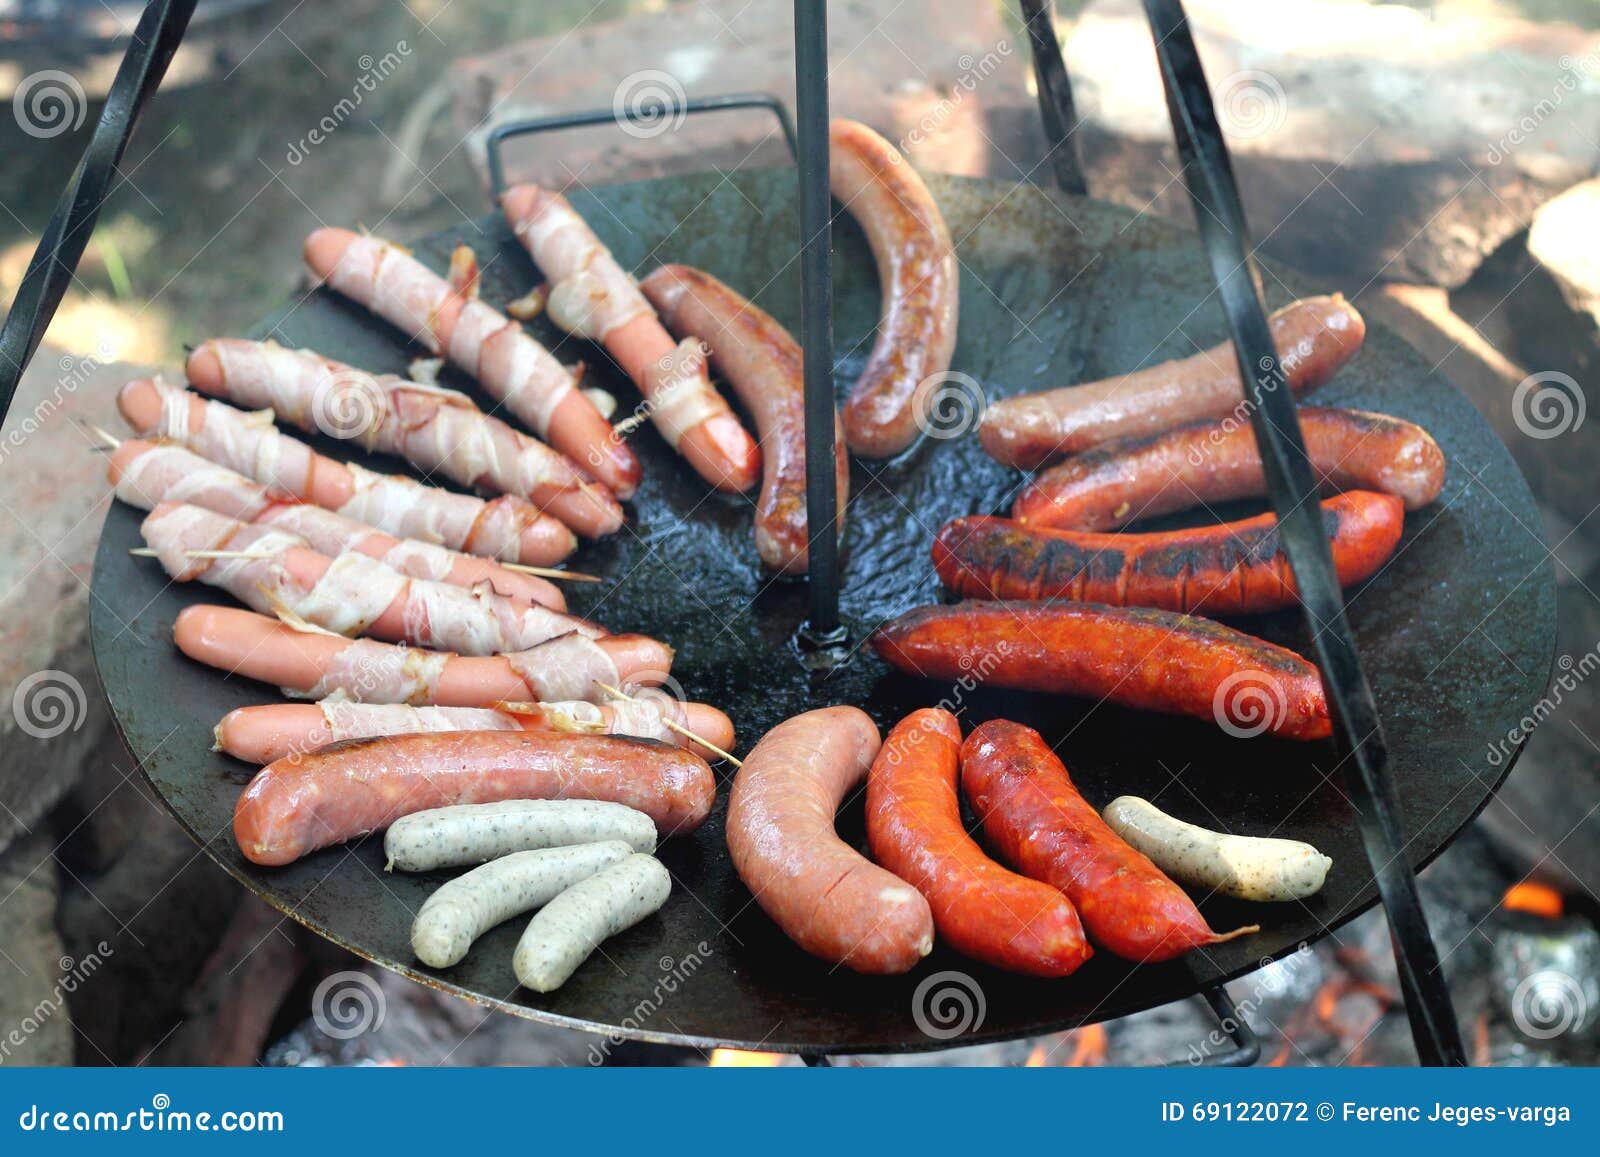 sausages at the camp fire